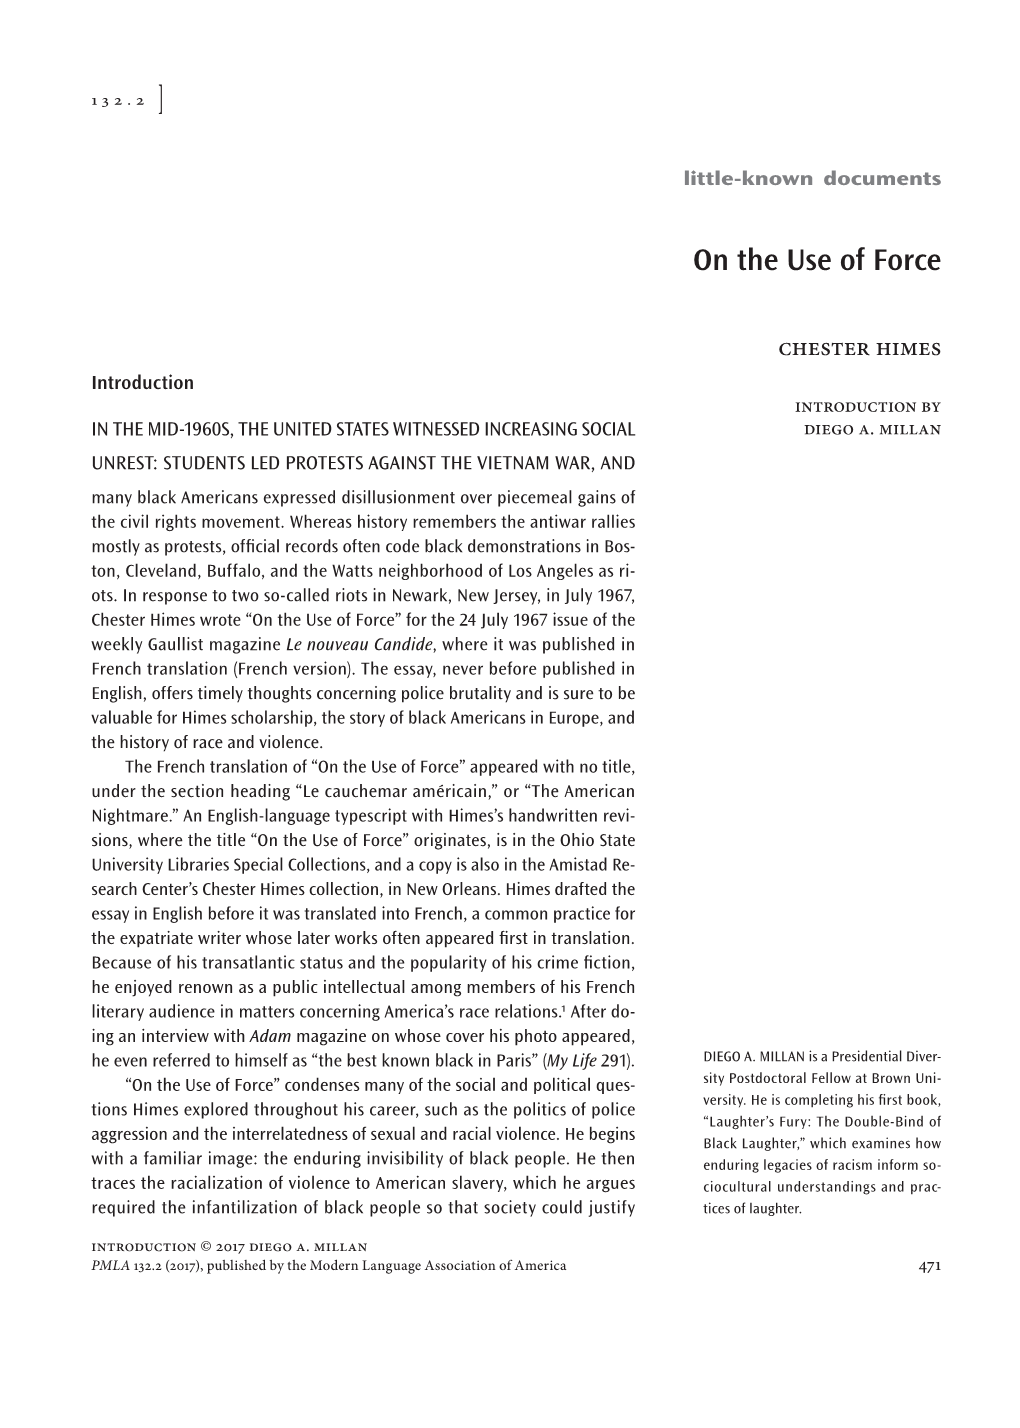 On the Use of Force